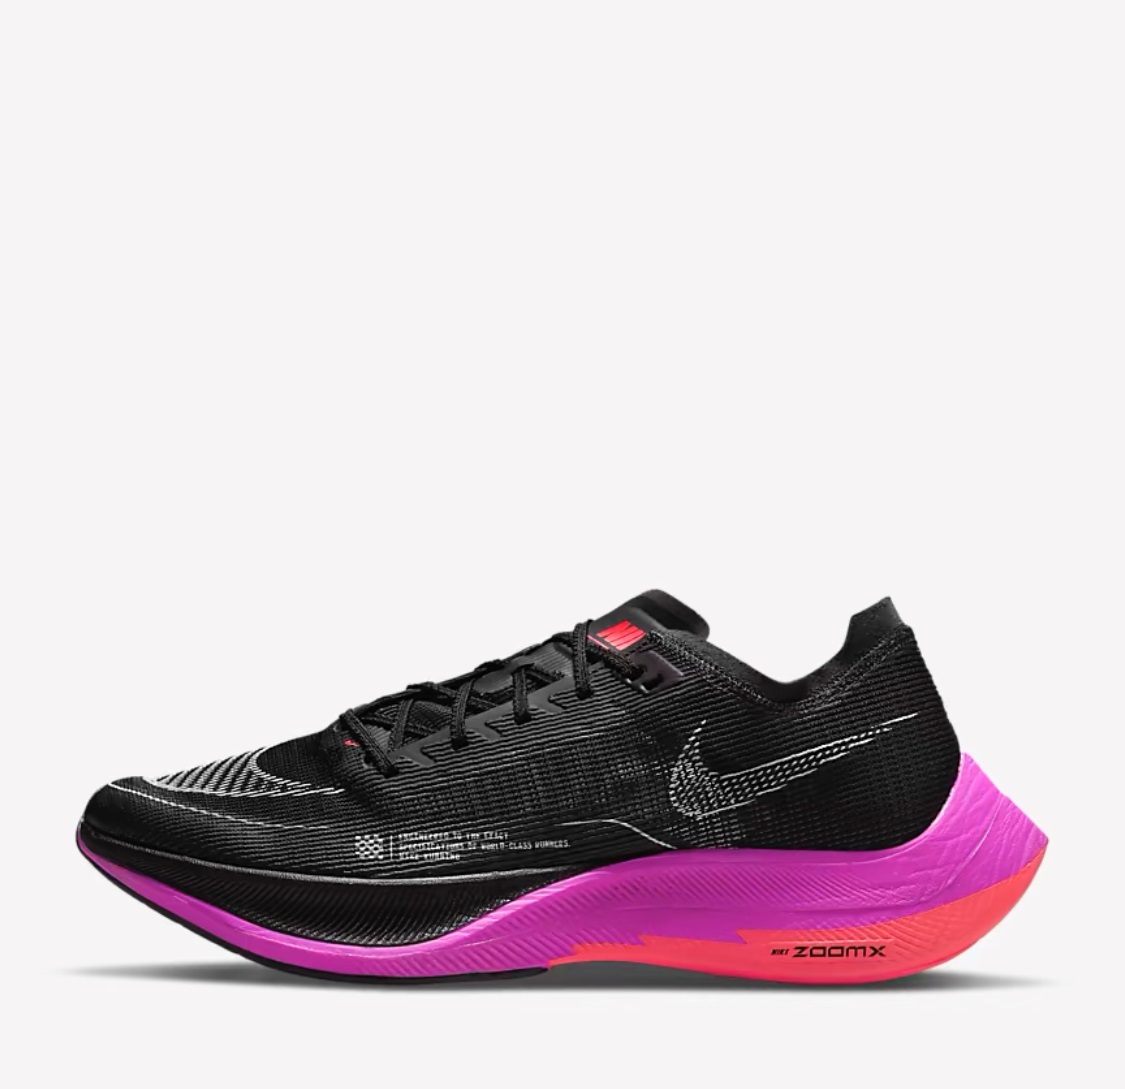 NIKE ZoomX Vaporfly NEXT%2 28.5cm (ナイキ ズームX ヴェイパーフライ